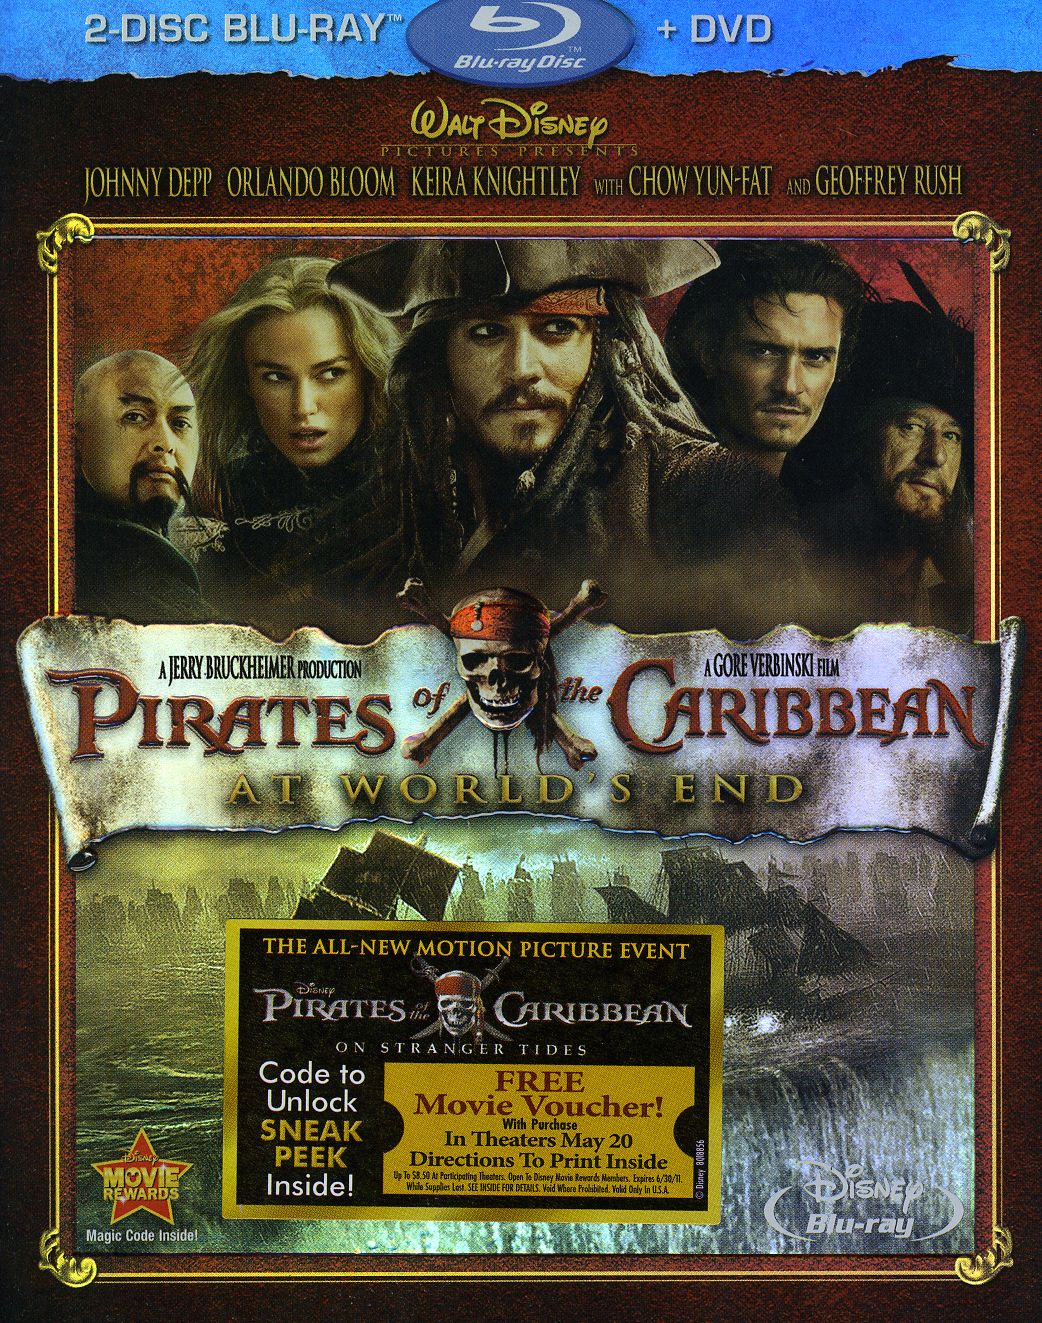 PIRATES OF THE CARIBBEAN: AT WORLD'S END (3PC)